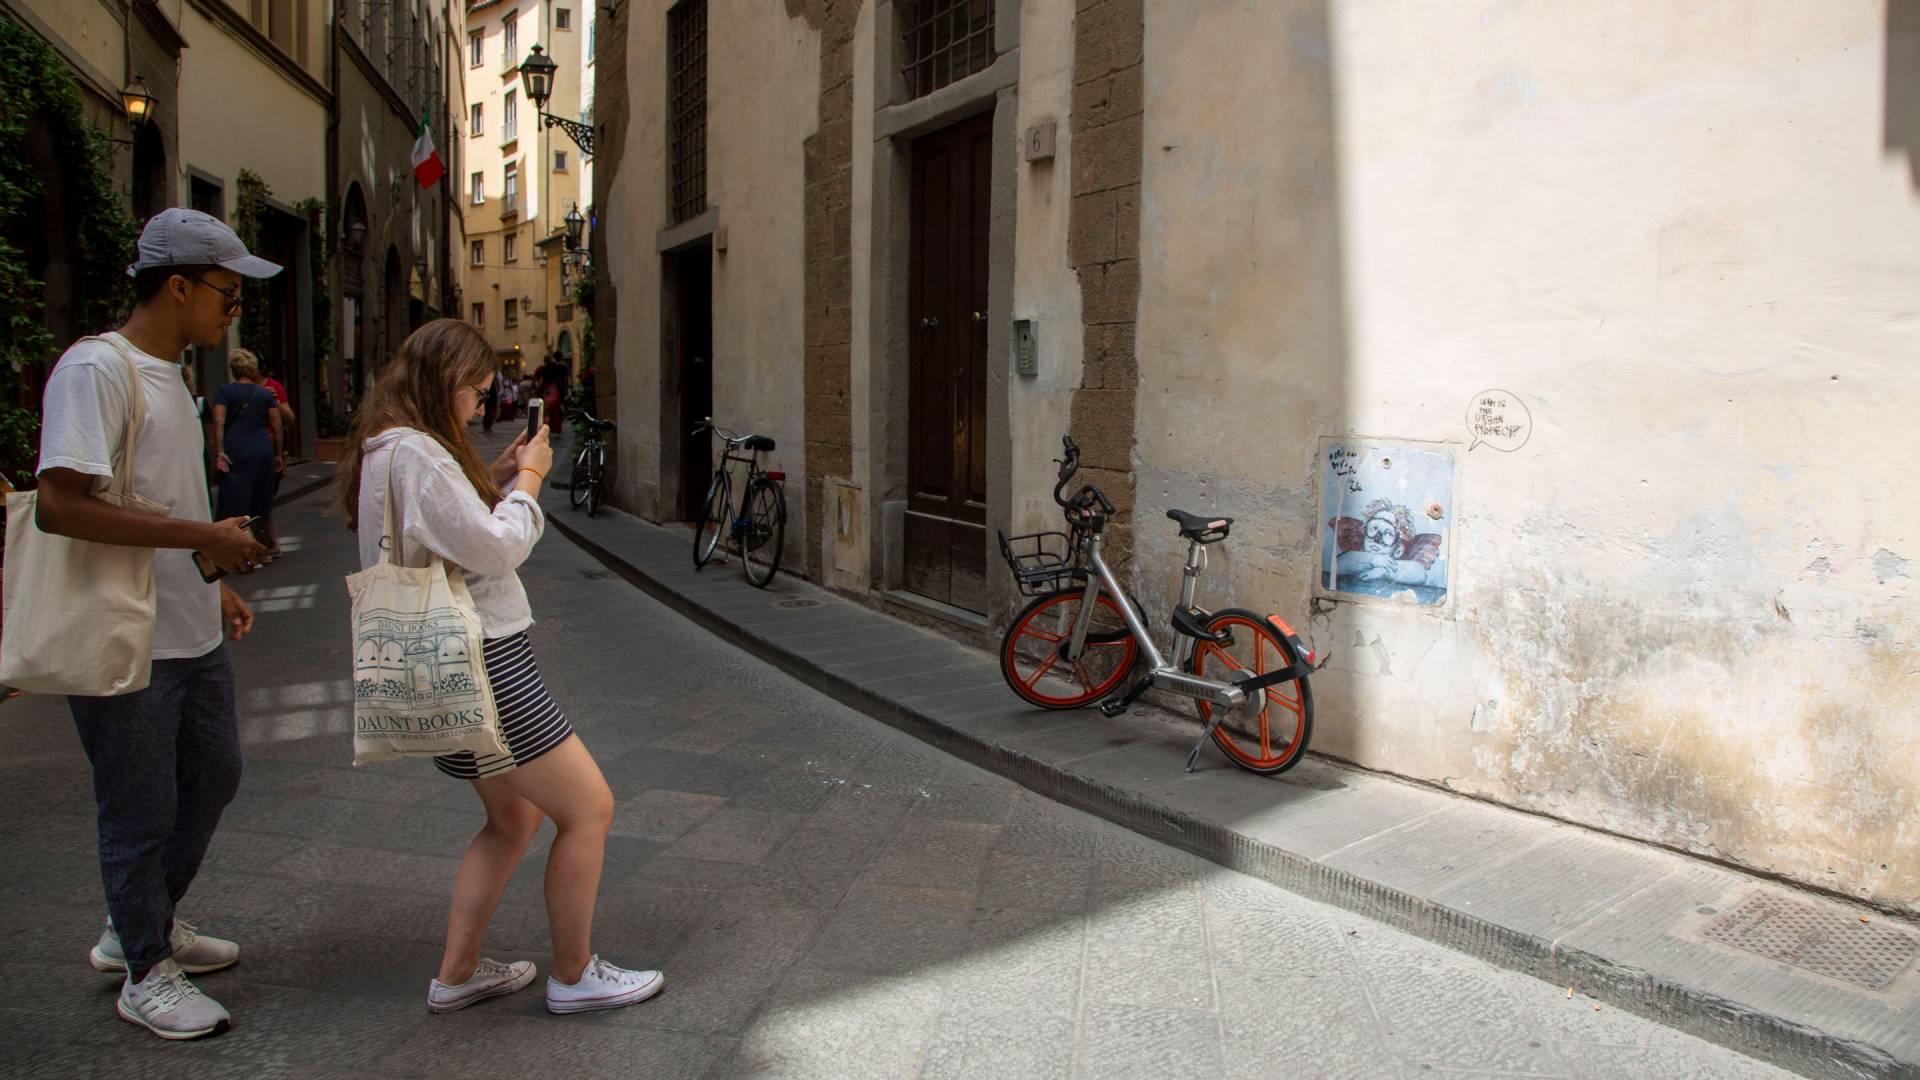 Students take photos of graffiti in Florence